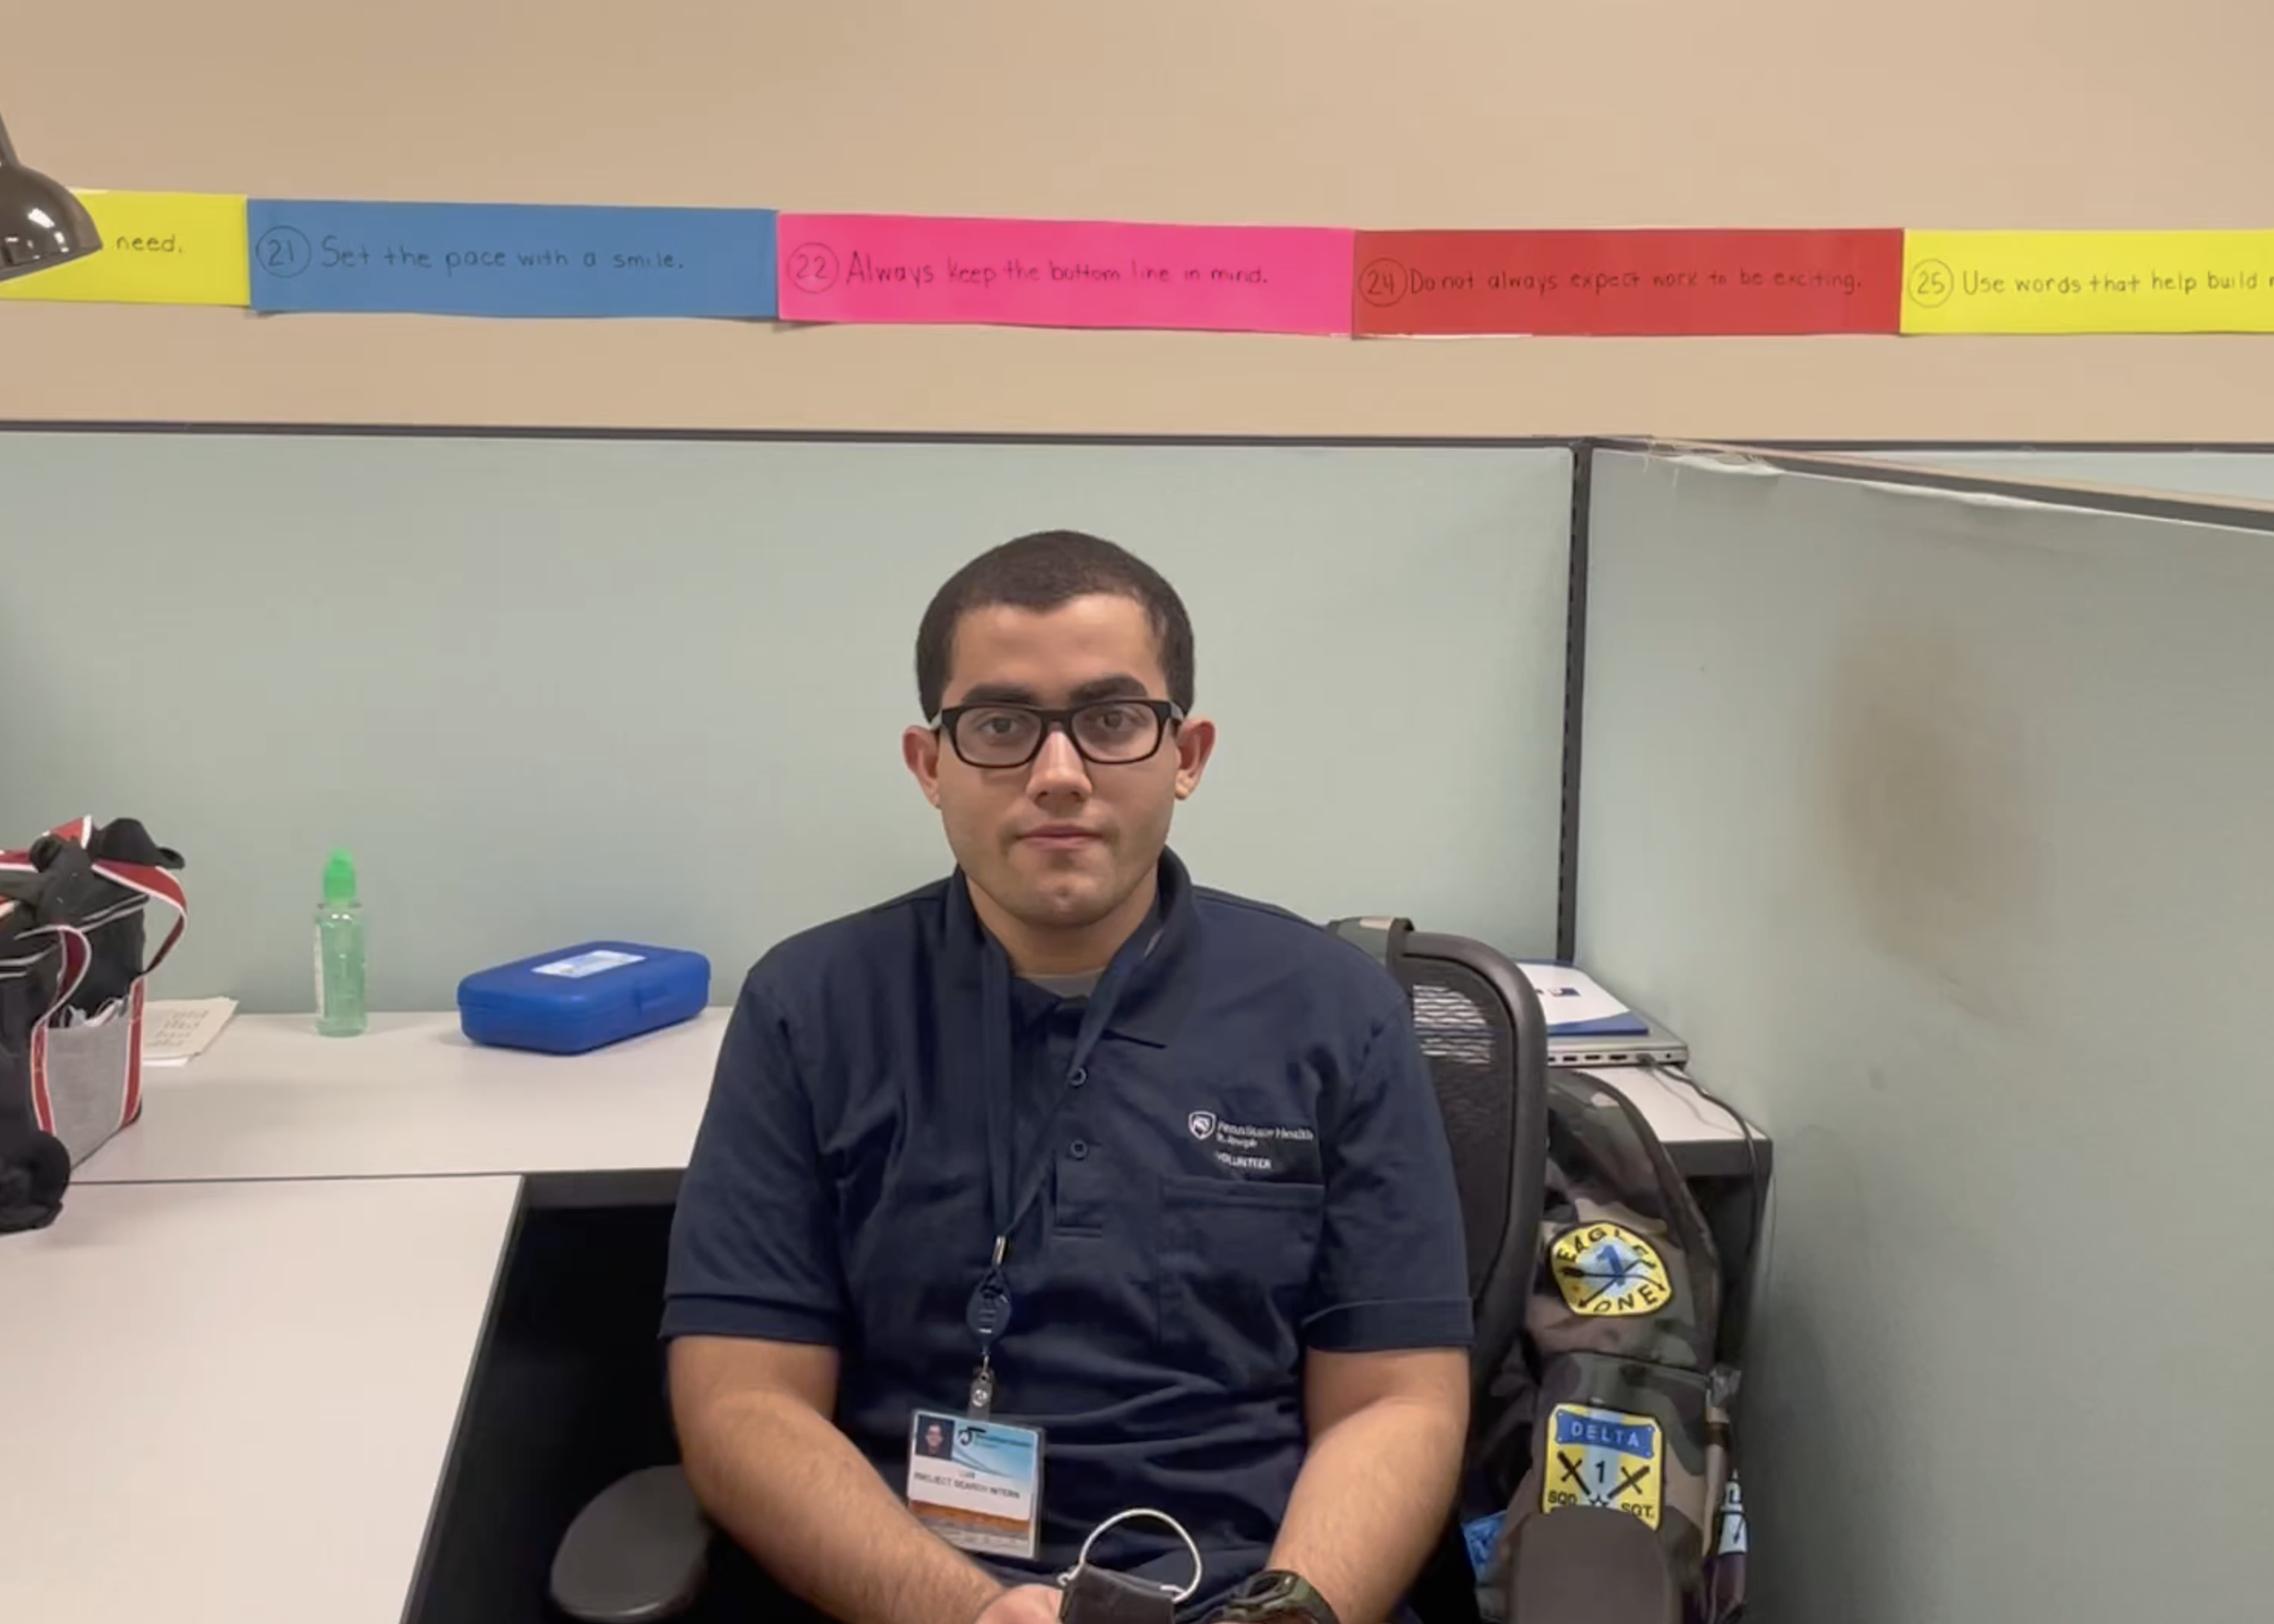 Project SEARCH intern Luis Calderon, Reading School District, discusses his internship during the virtual open house on December 18.